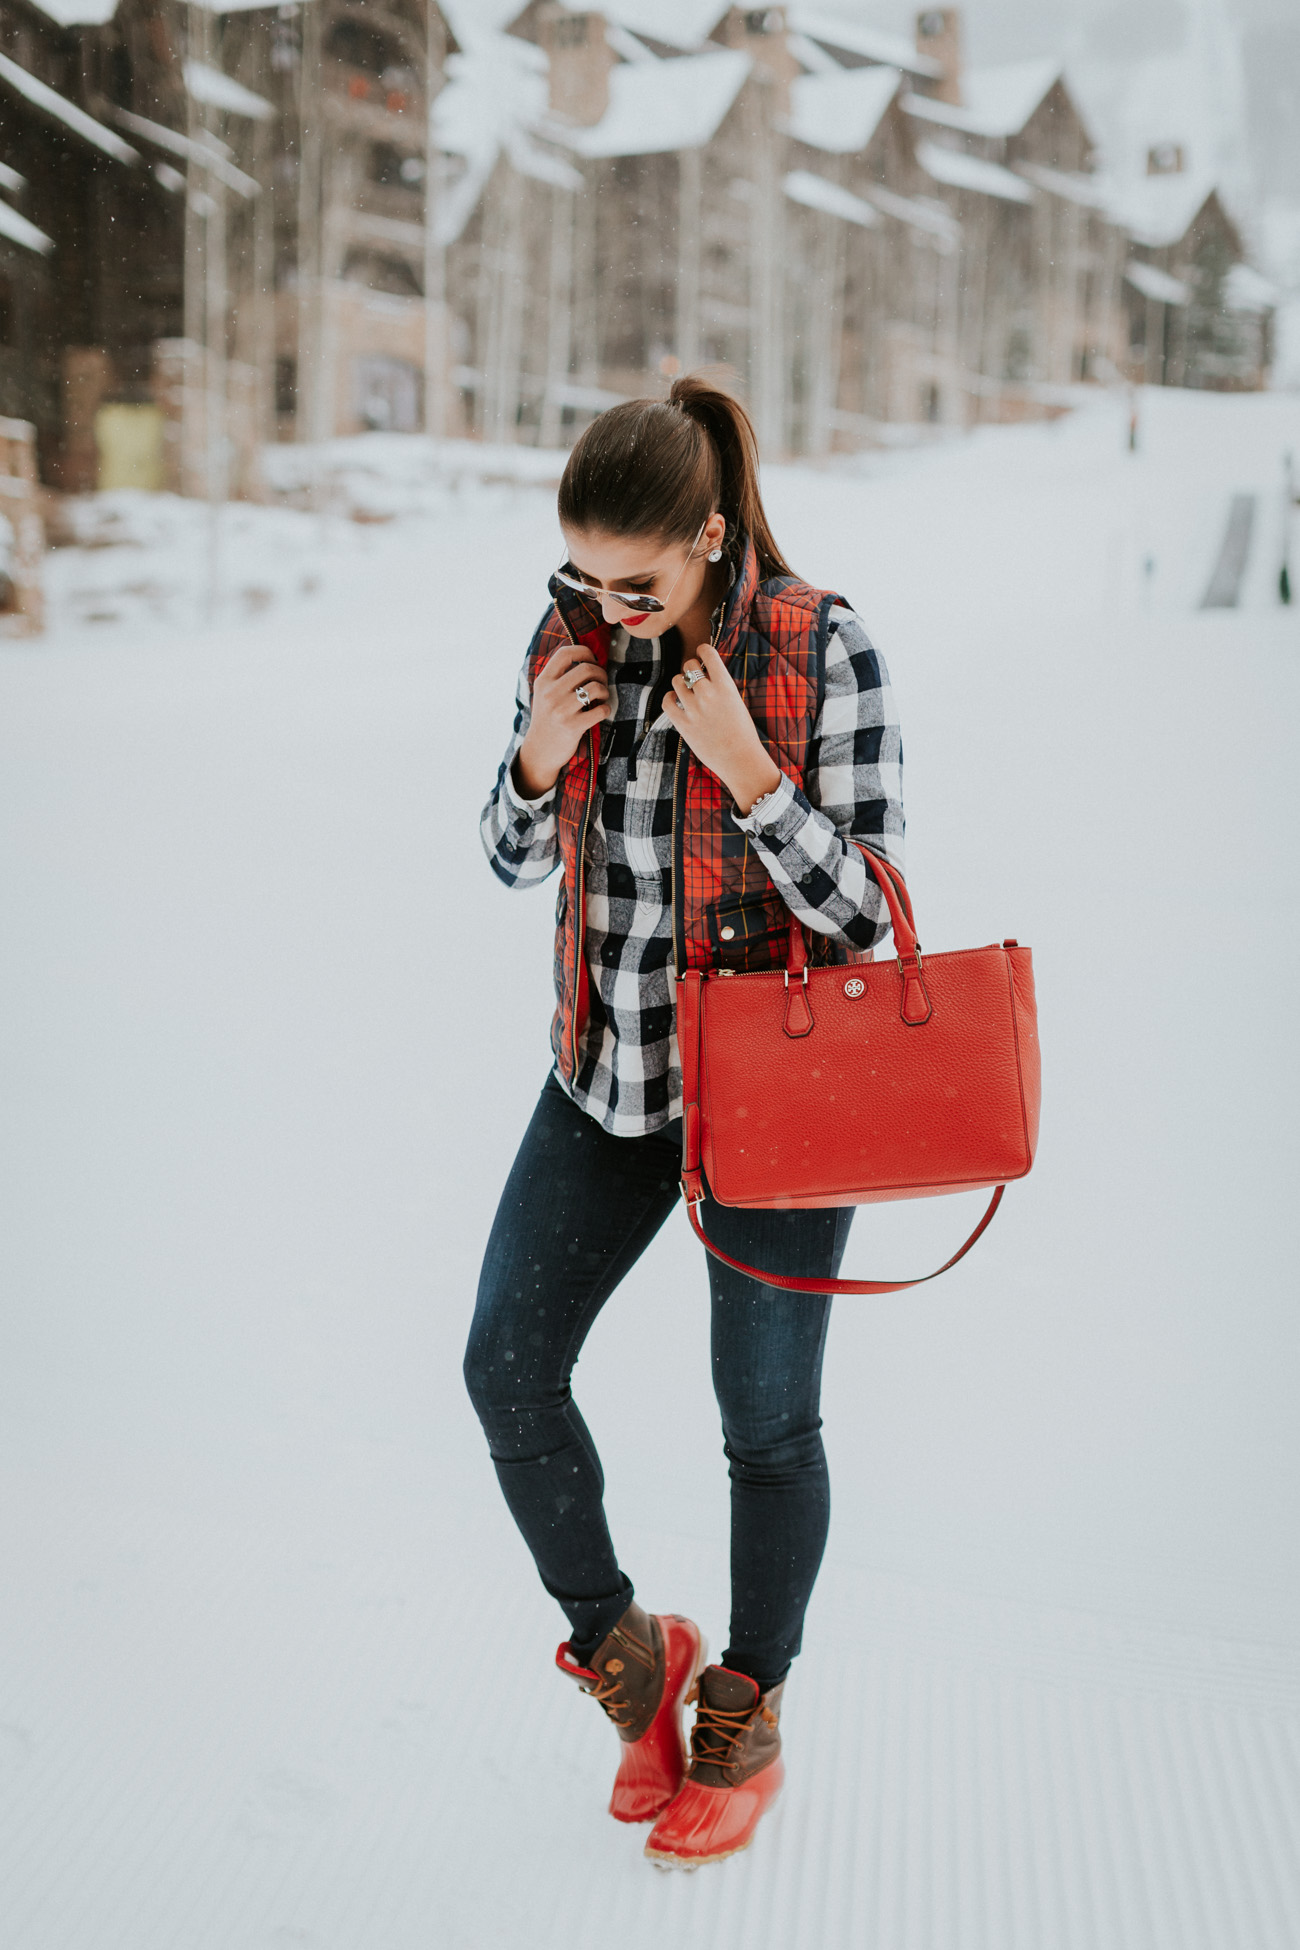 tartan plaid vest, buffalo check shirt, buffalo plaid shirt, buffalo check shirt jacket, j.crew plaid vest, j.crew excursion vest, red duckboots, red sperry duck boots, red sperry saltwater boots, holiday fashion, holiday style, holiday outfit, snow outfit, vail colorado, red tory burch tote // grace wainwright a southern drawl